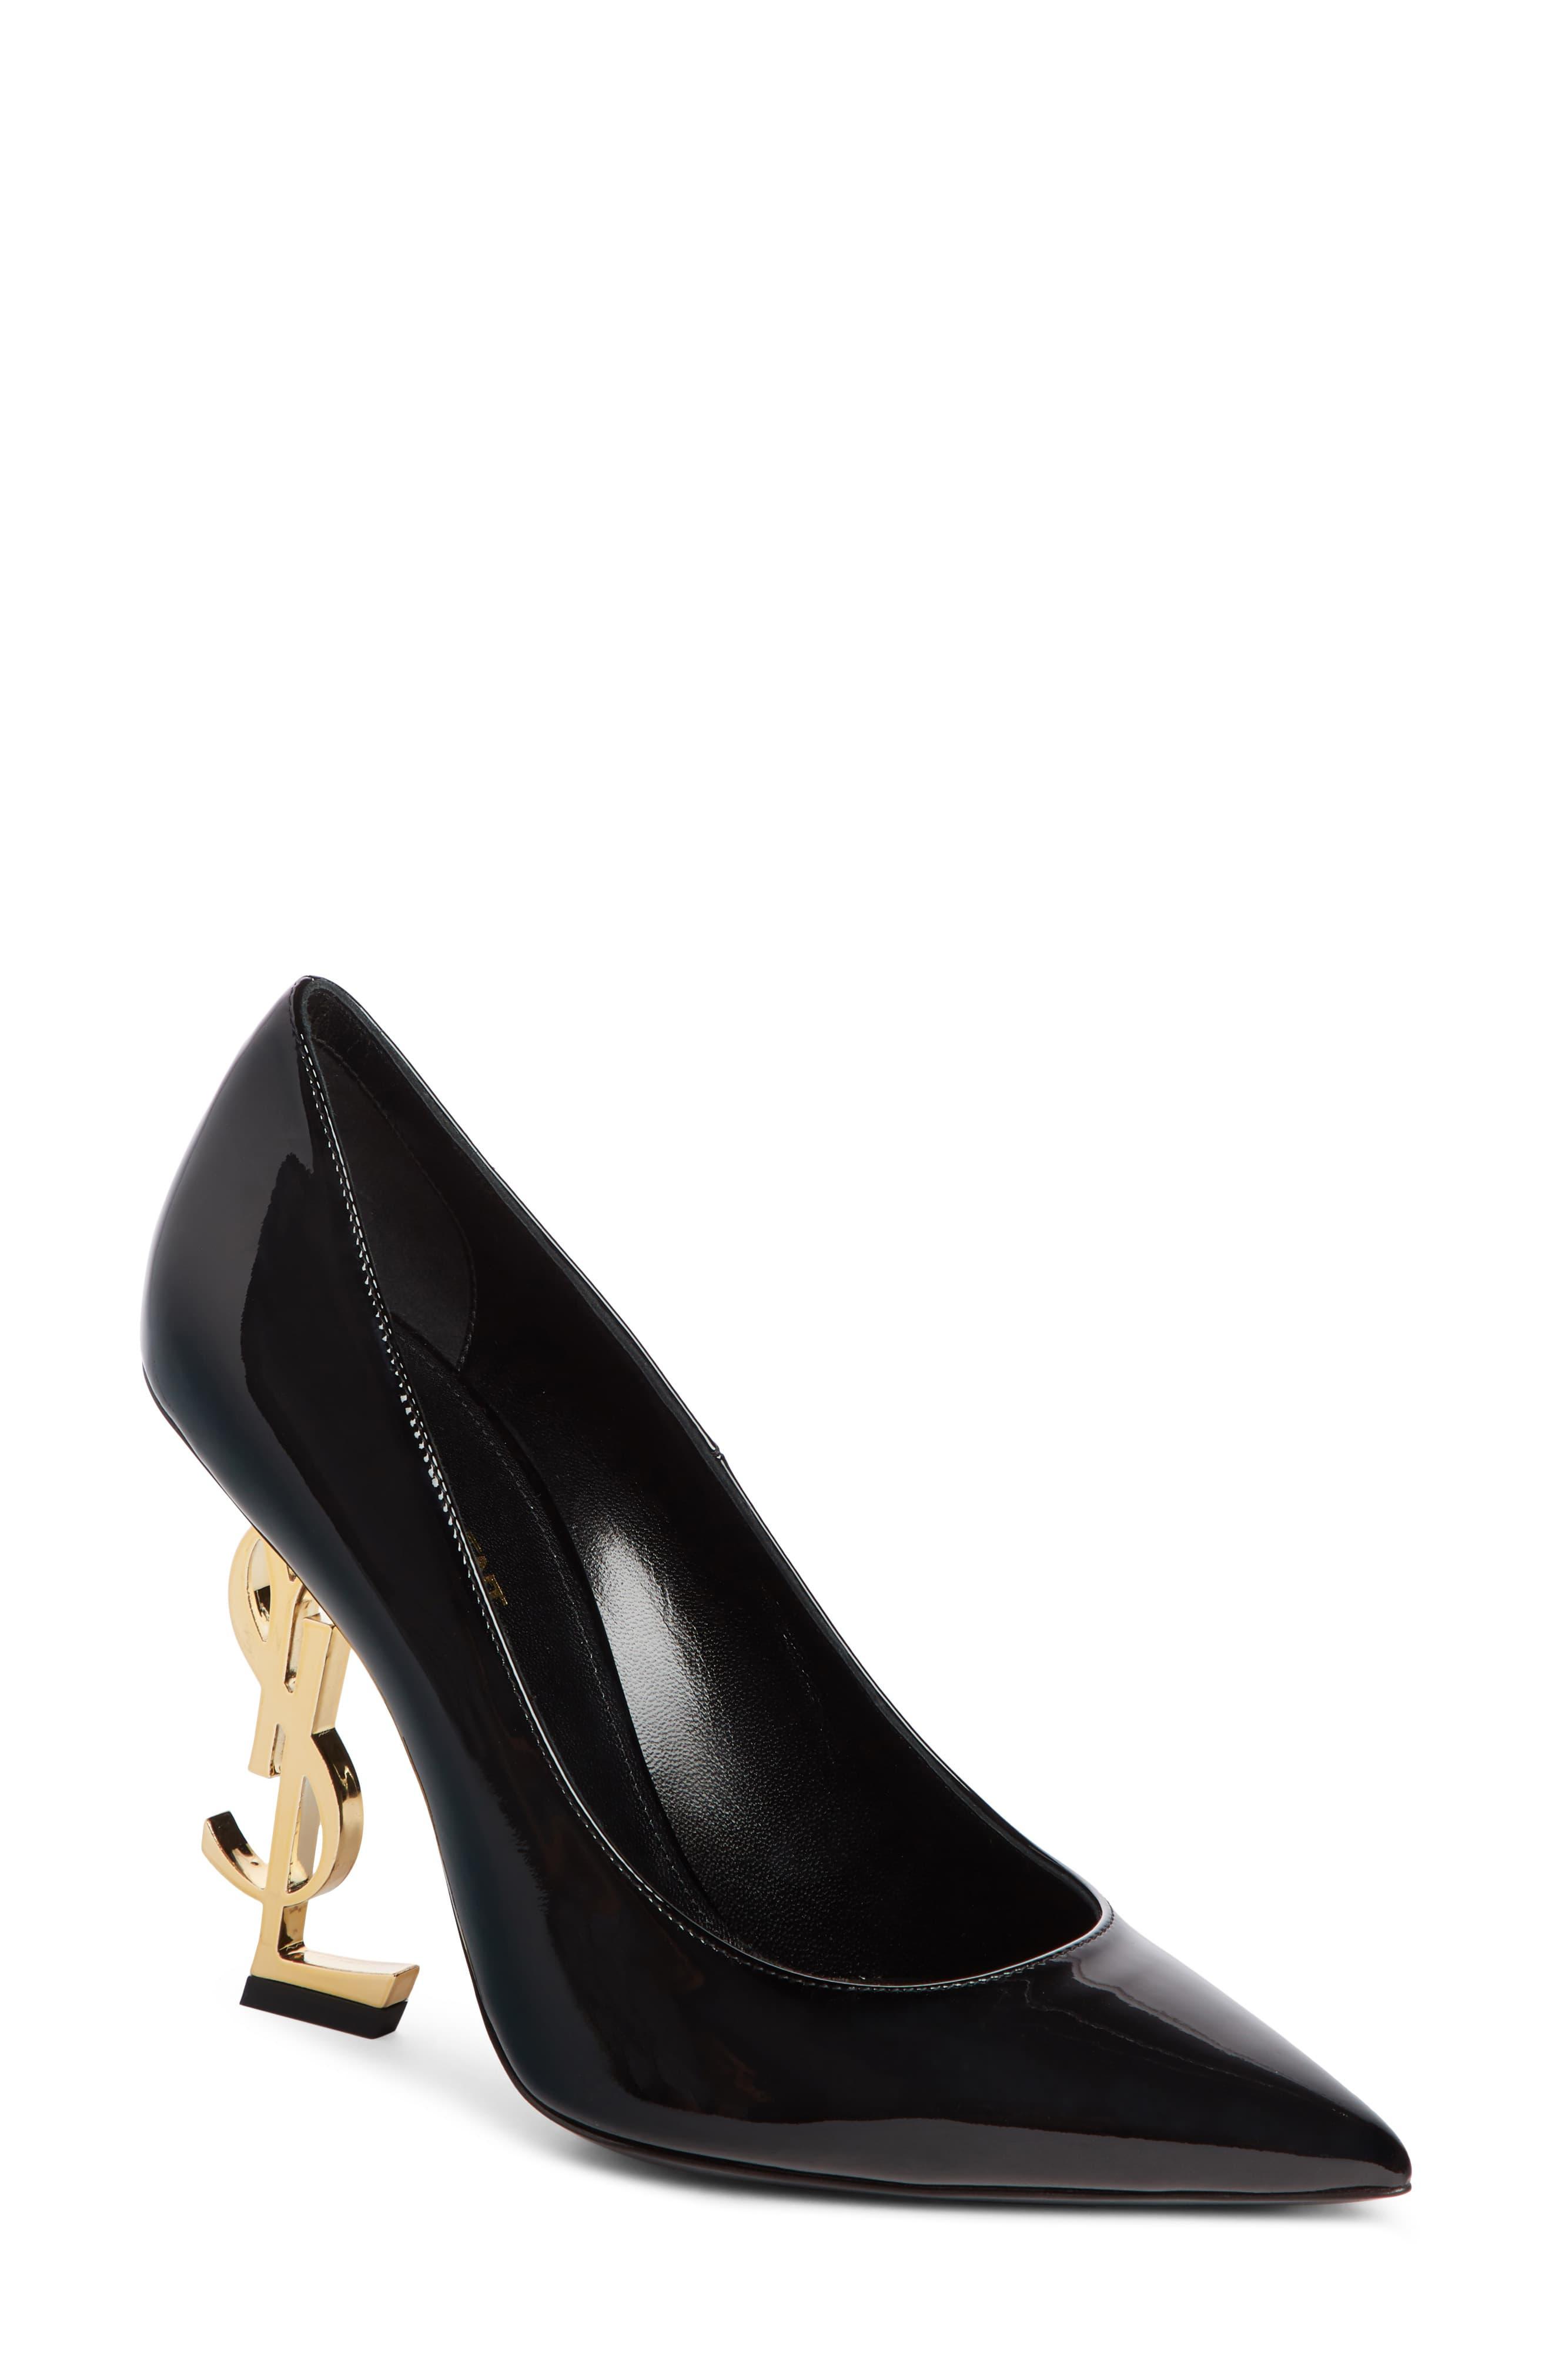 Saint Laurent Leather Opyum Ysl Pointed Toe Pump in Black Patent ...